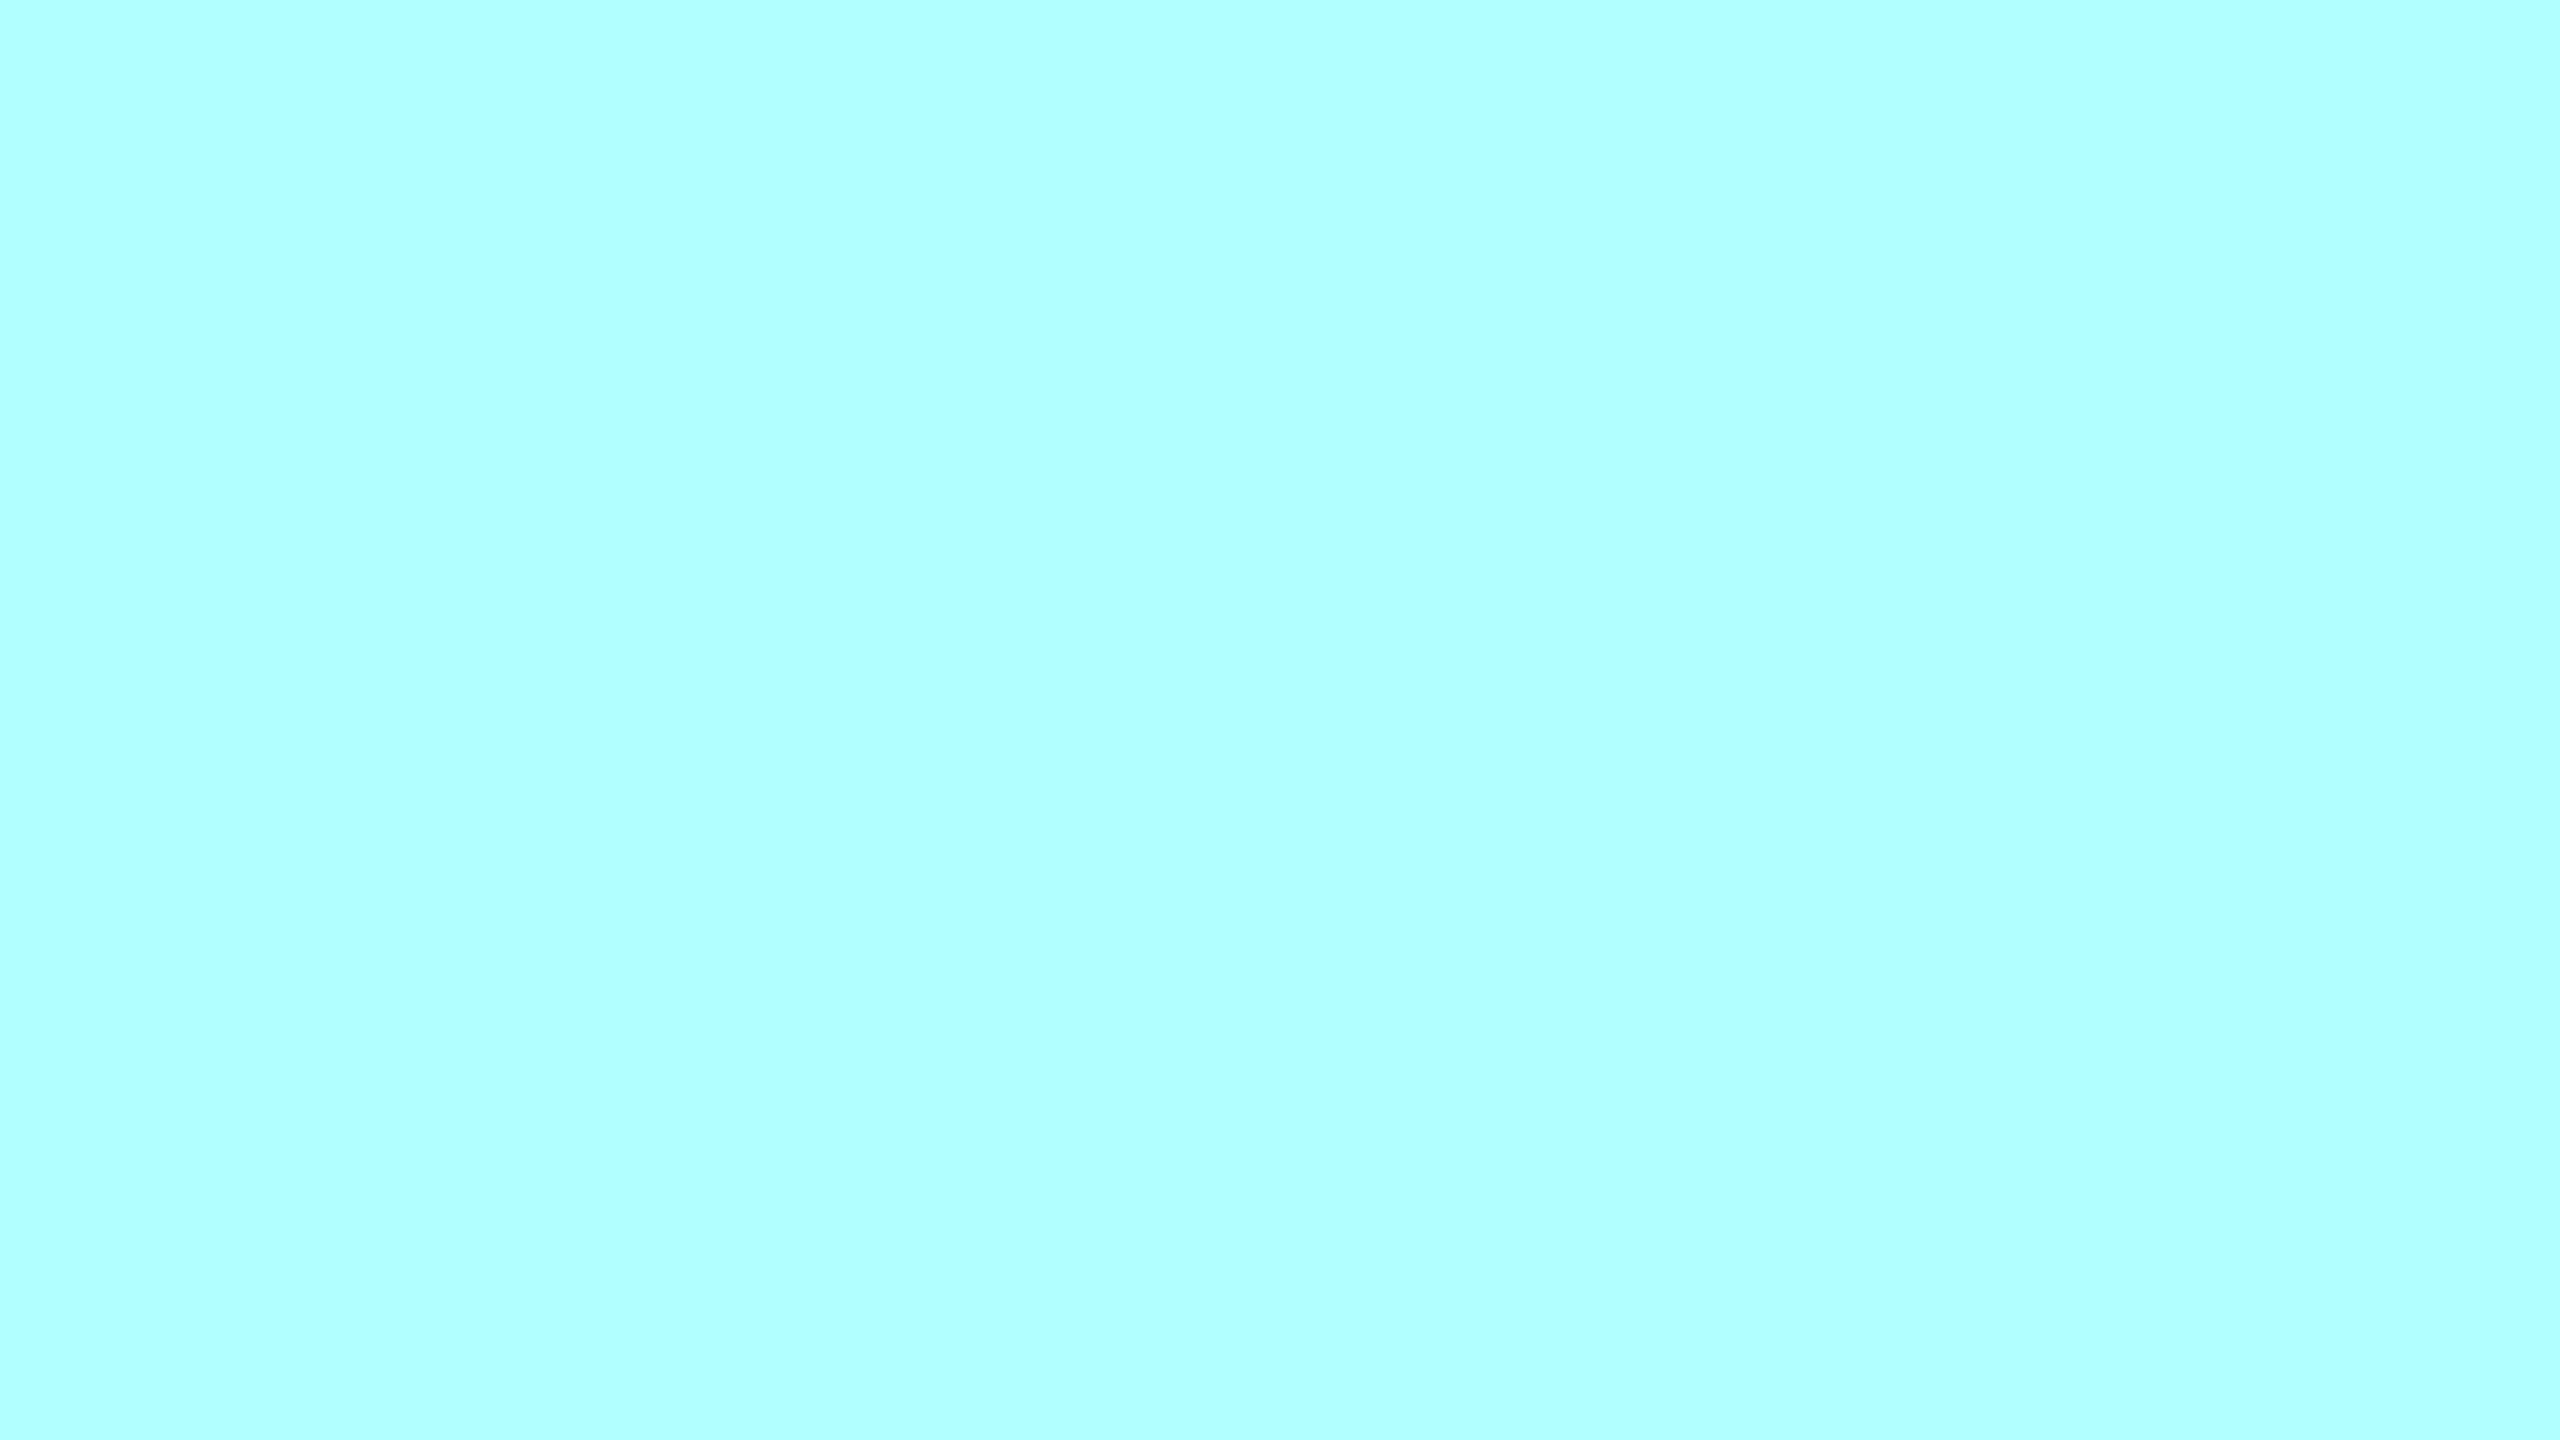 Italian Sky Blue Solid Color Background